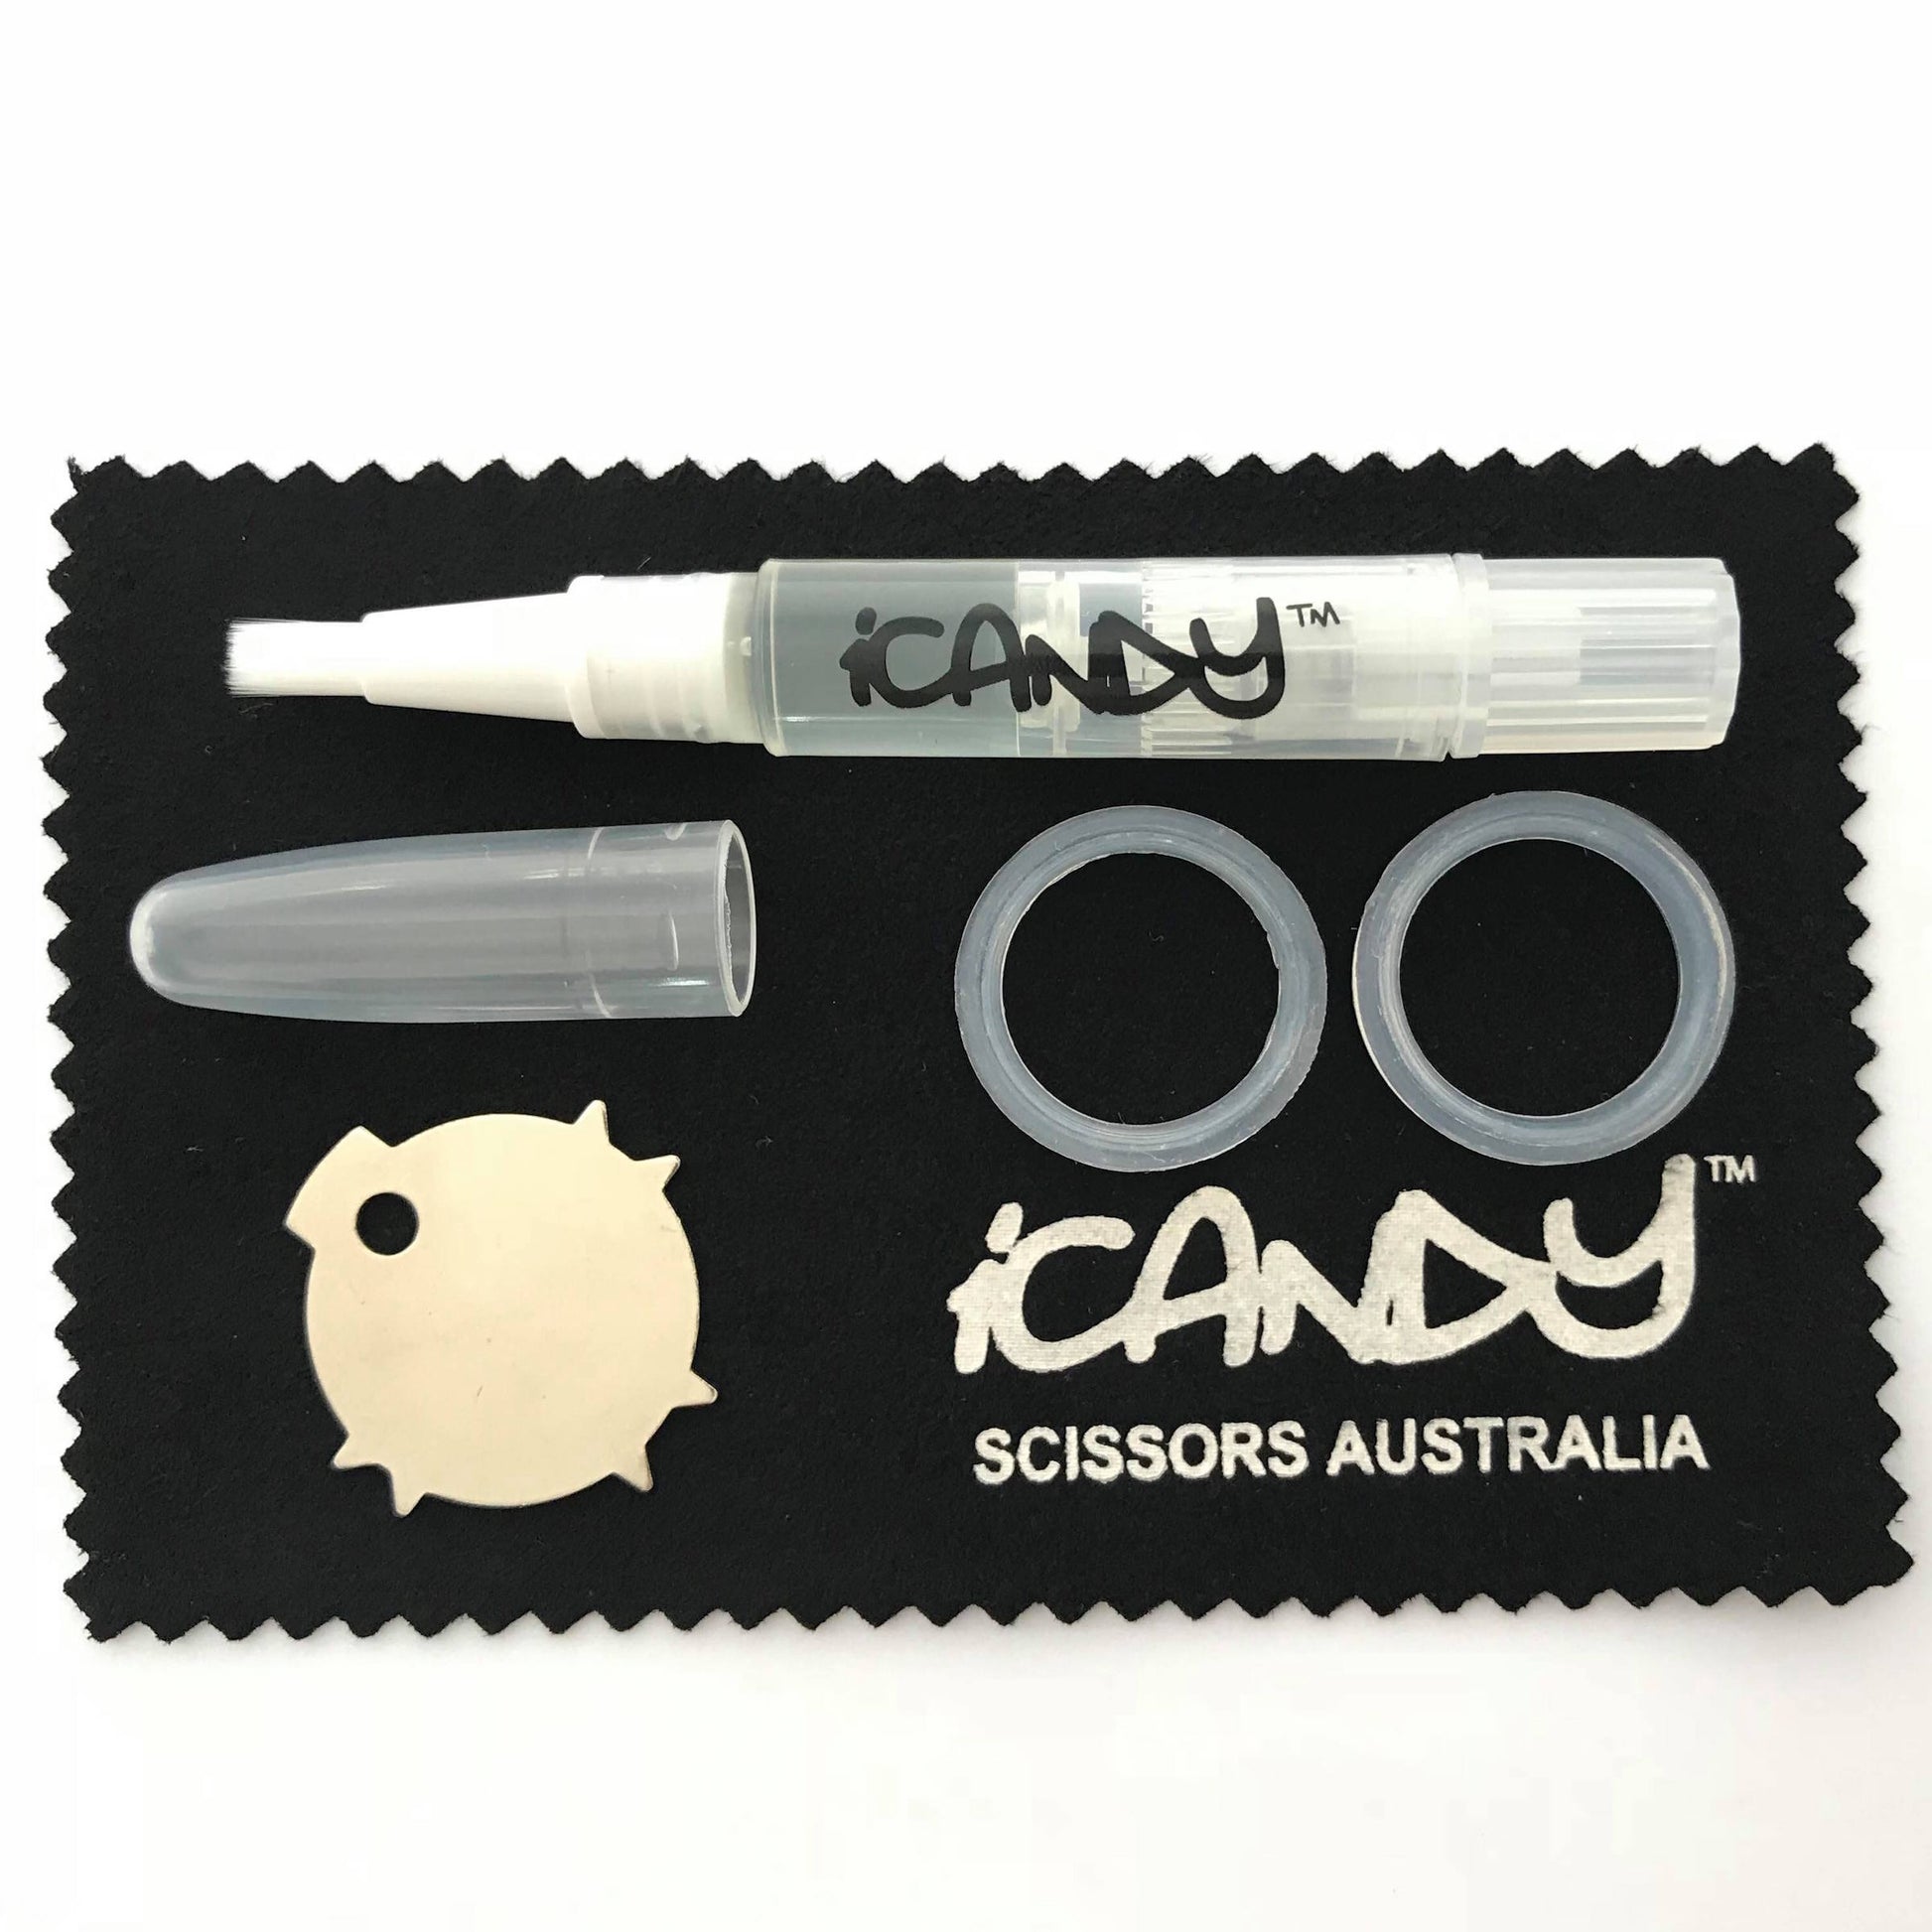 iCandy SLIDER VG10 Scissors (6.5 inch) Limited Edition! - iCandy Scissors